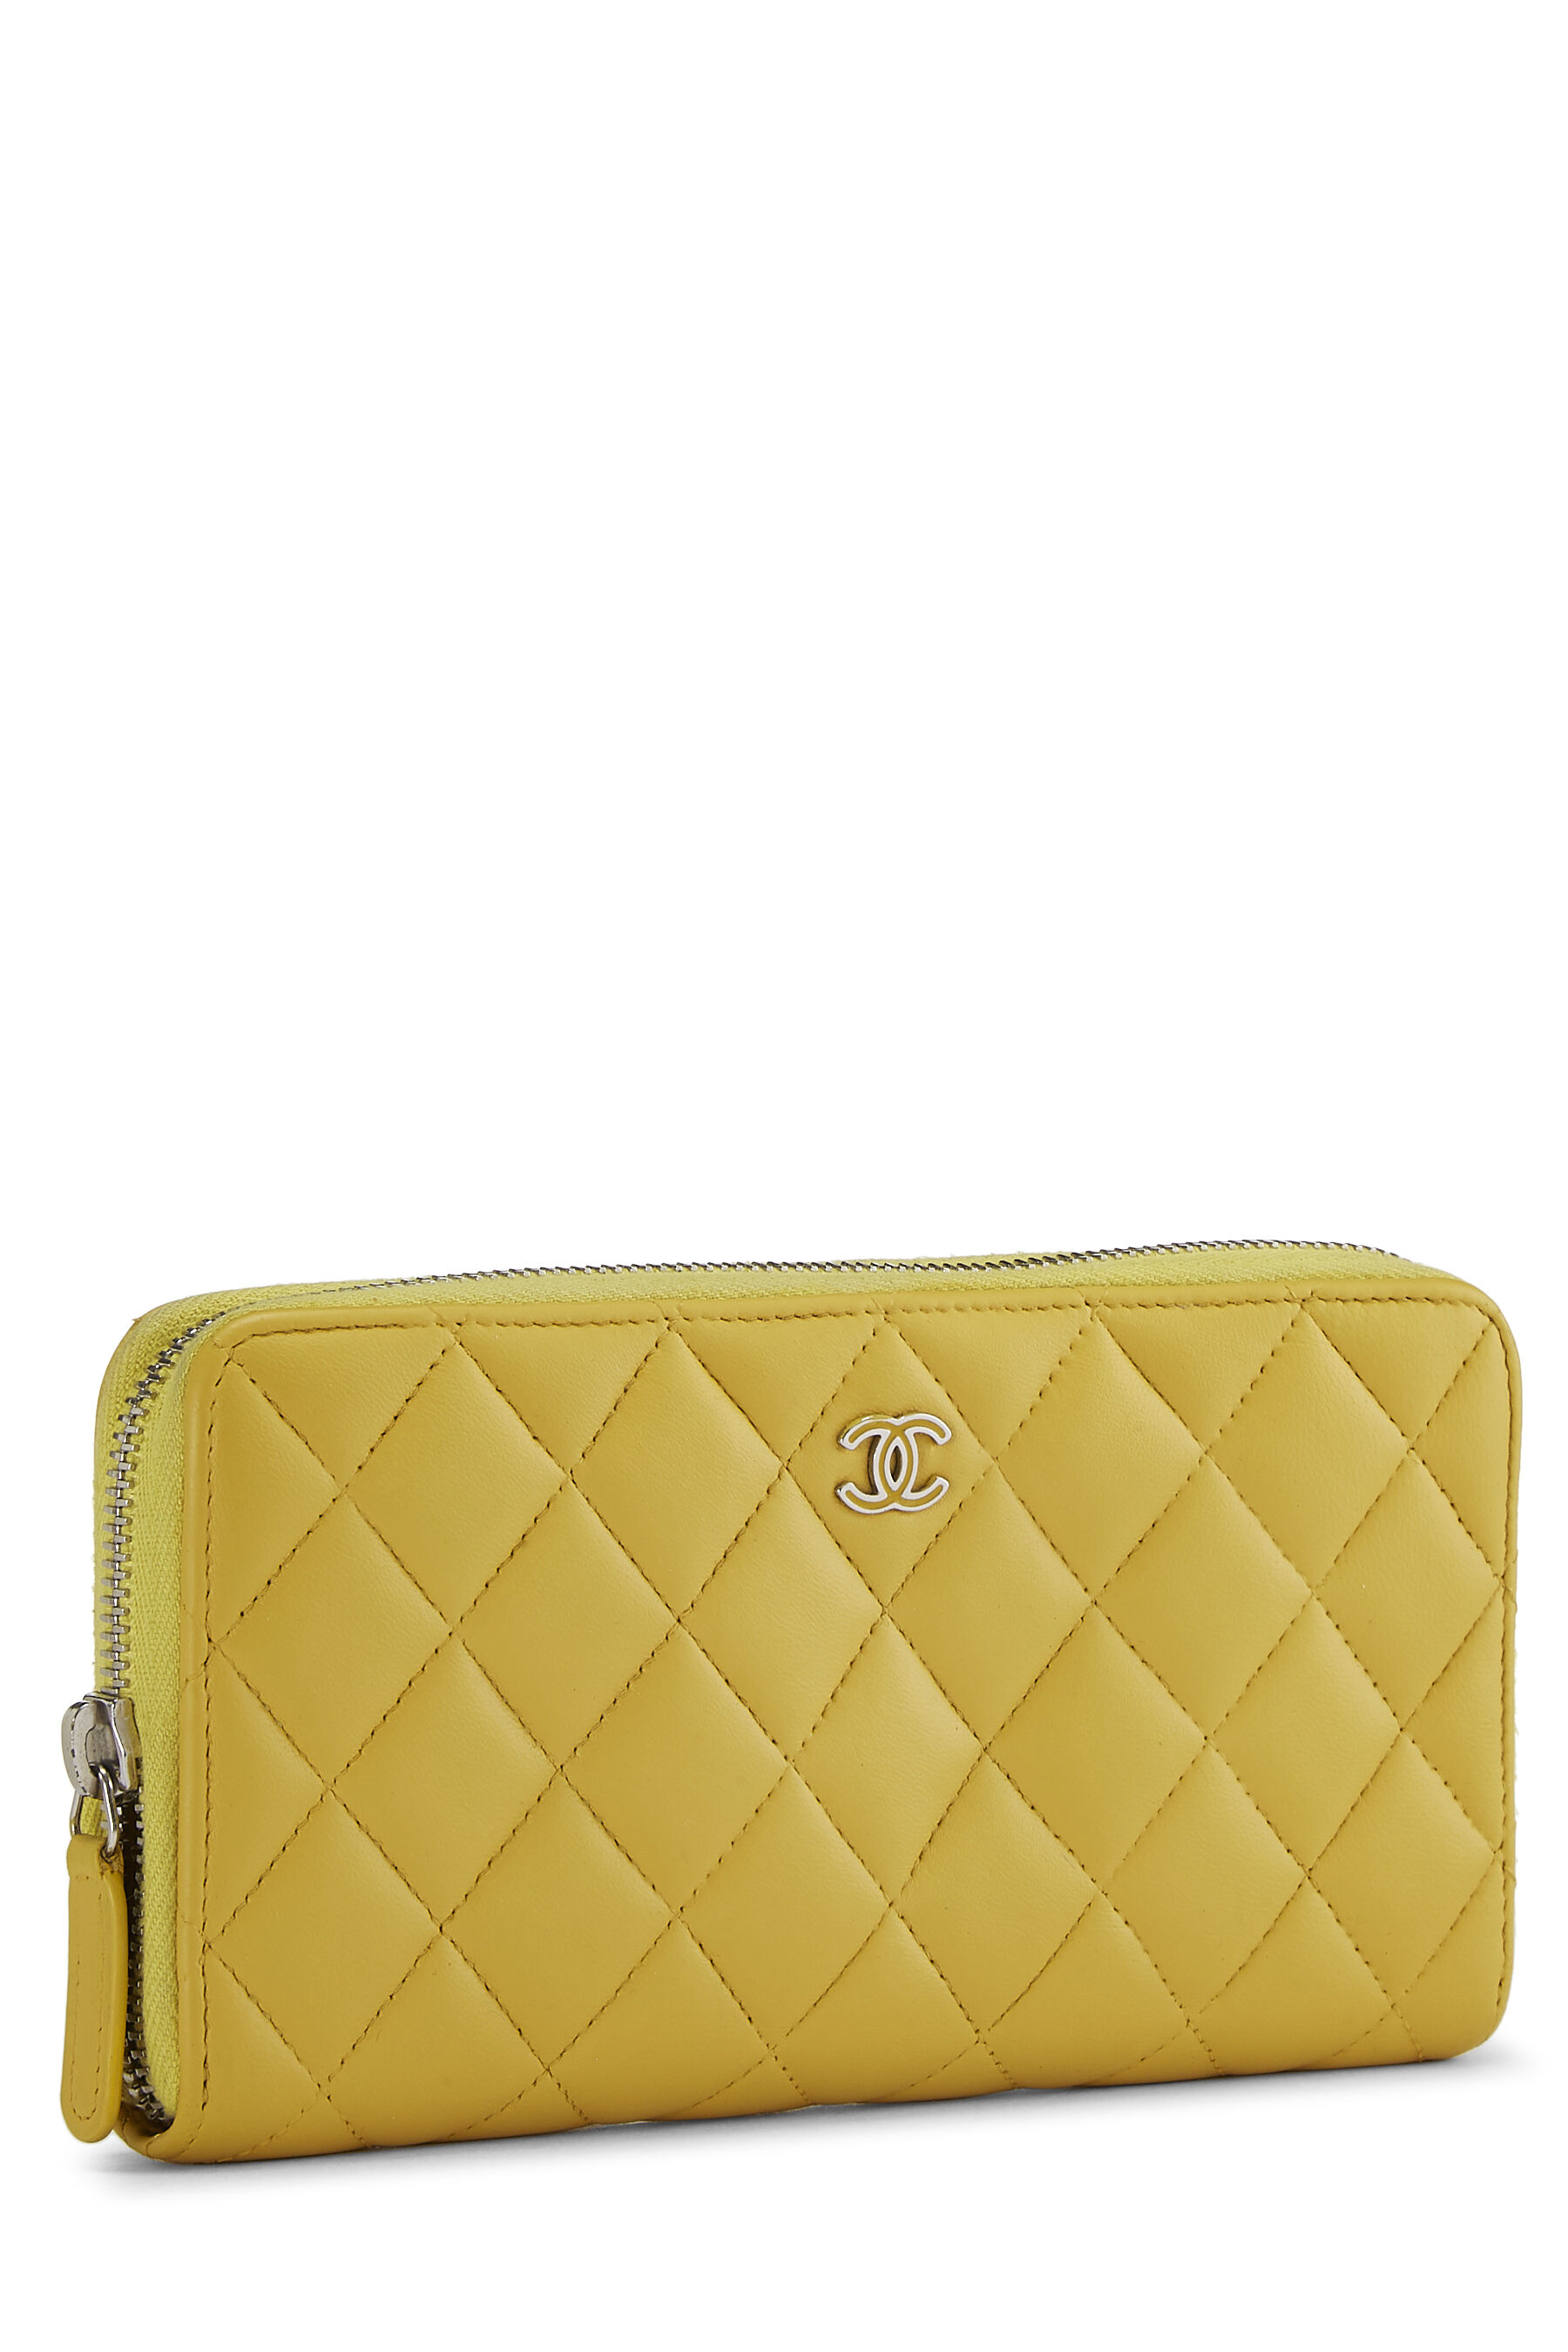 Chanel Yellow Quilted Lambskin Classic Zippy Wallet